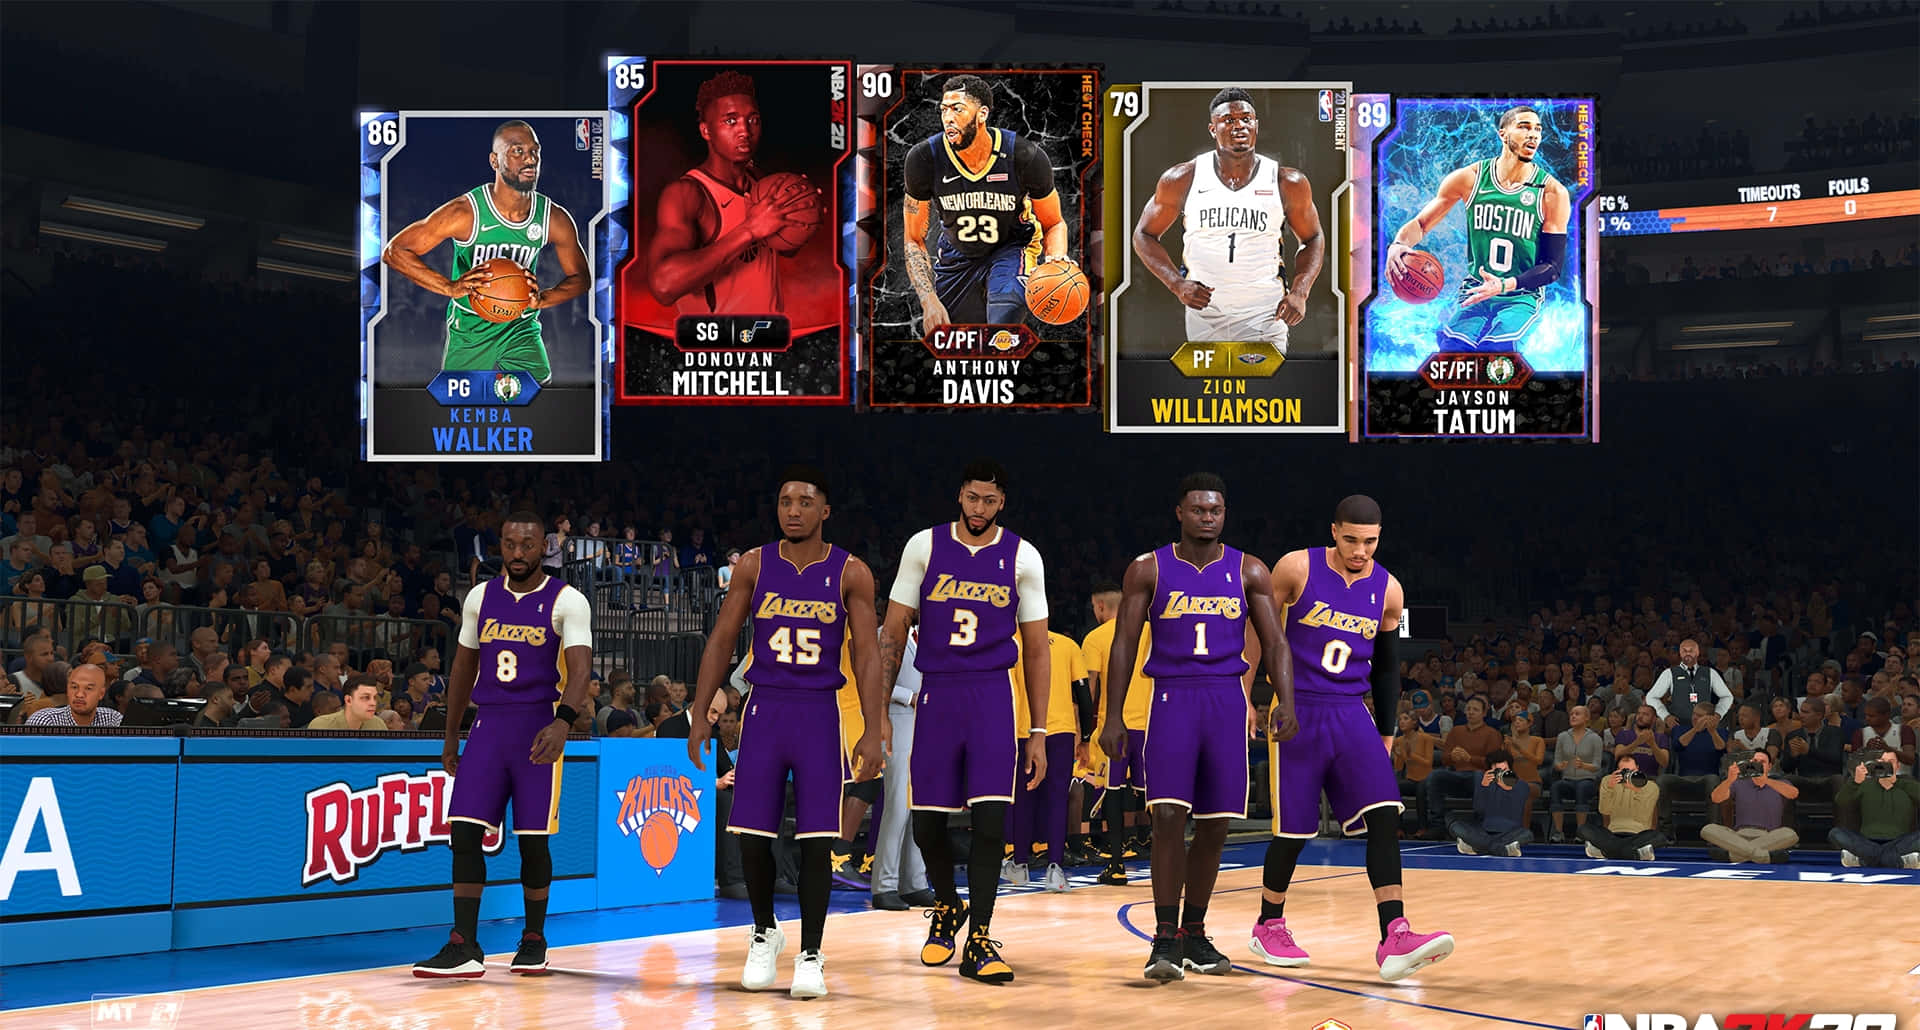 Exciting NBA 2K20 Game Action Wallpaper